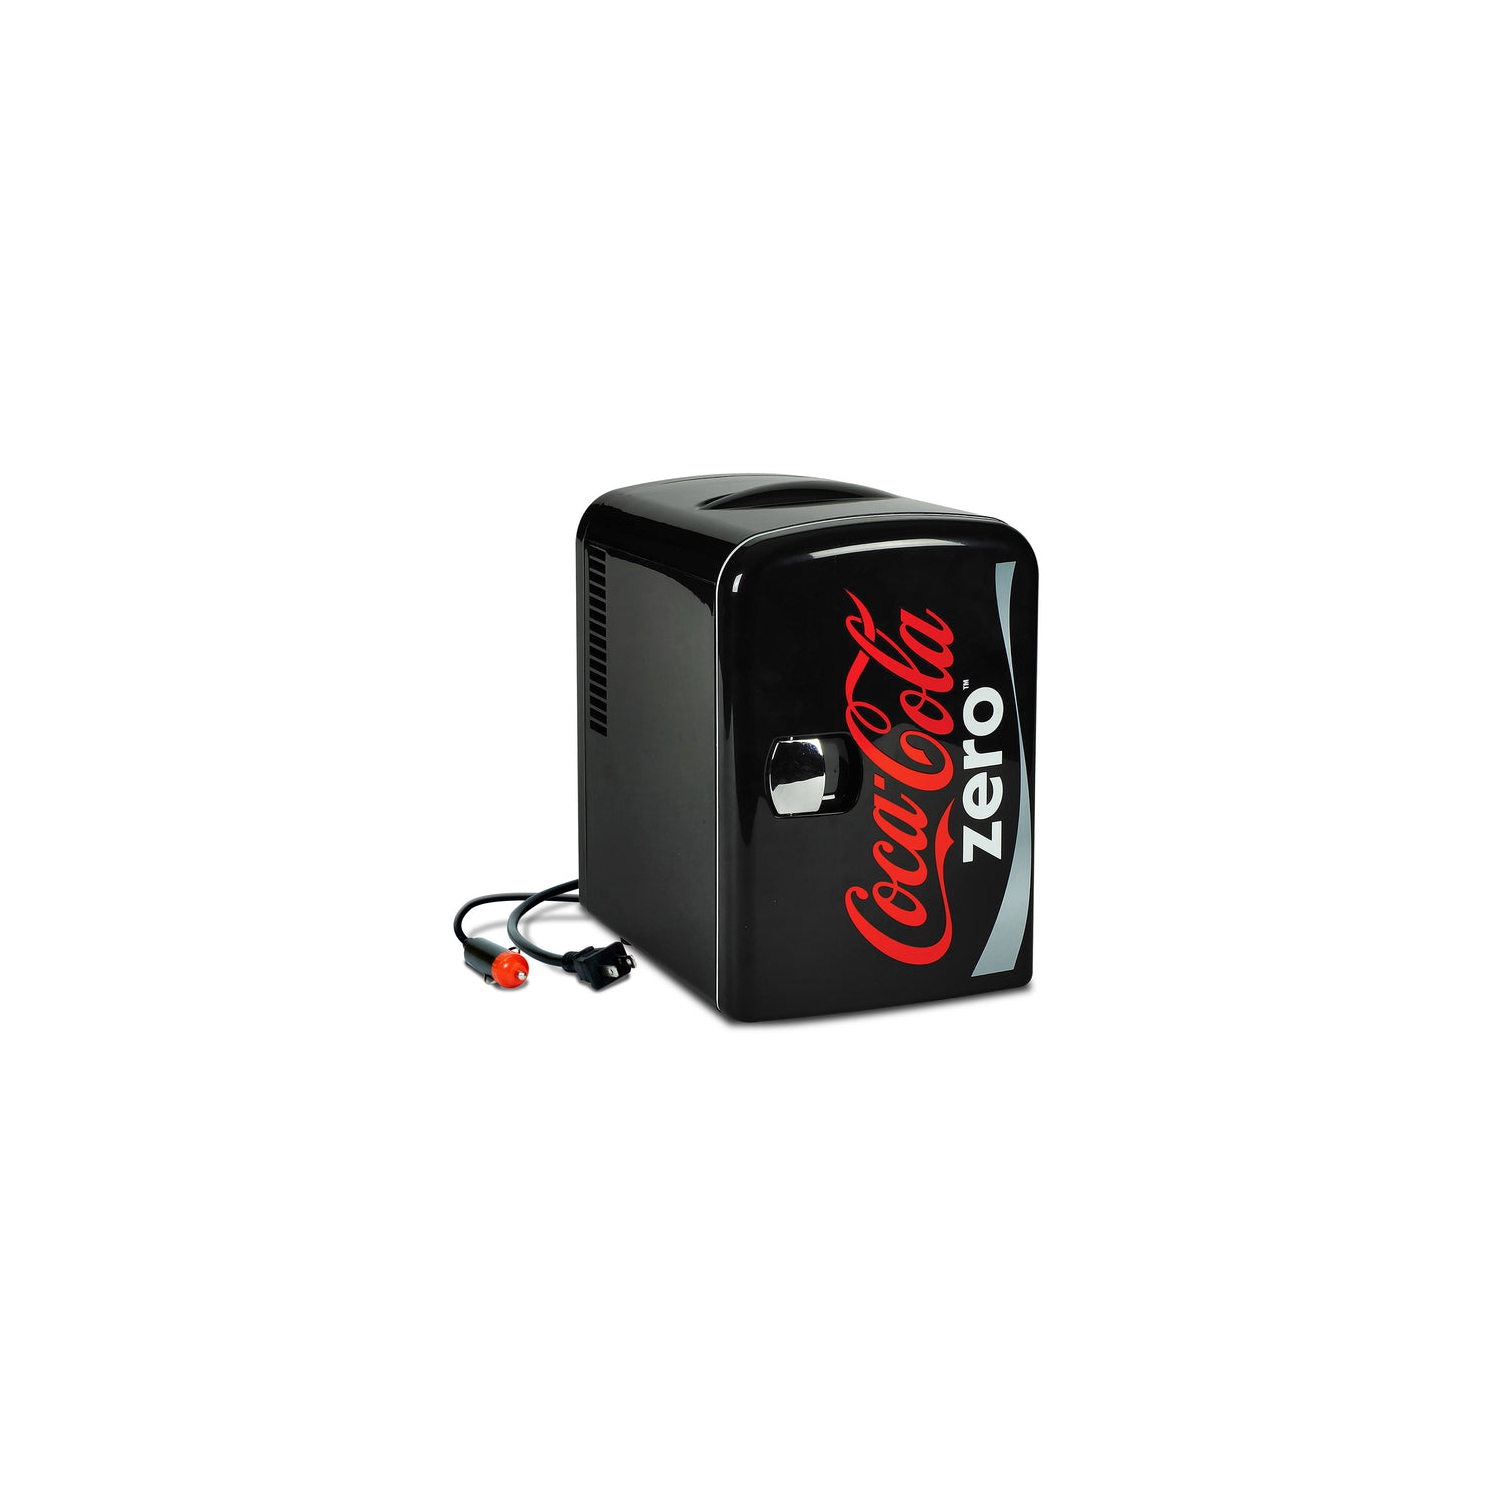 Coca-Cola Coke Zero 4L Portable Cooler/Warmer, Compact Personal Travel Fridge for Snacks Lunch Drinks Cosmetics, Includes 12V and AC Cords, Black